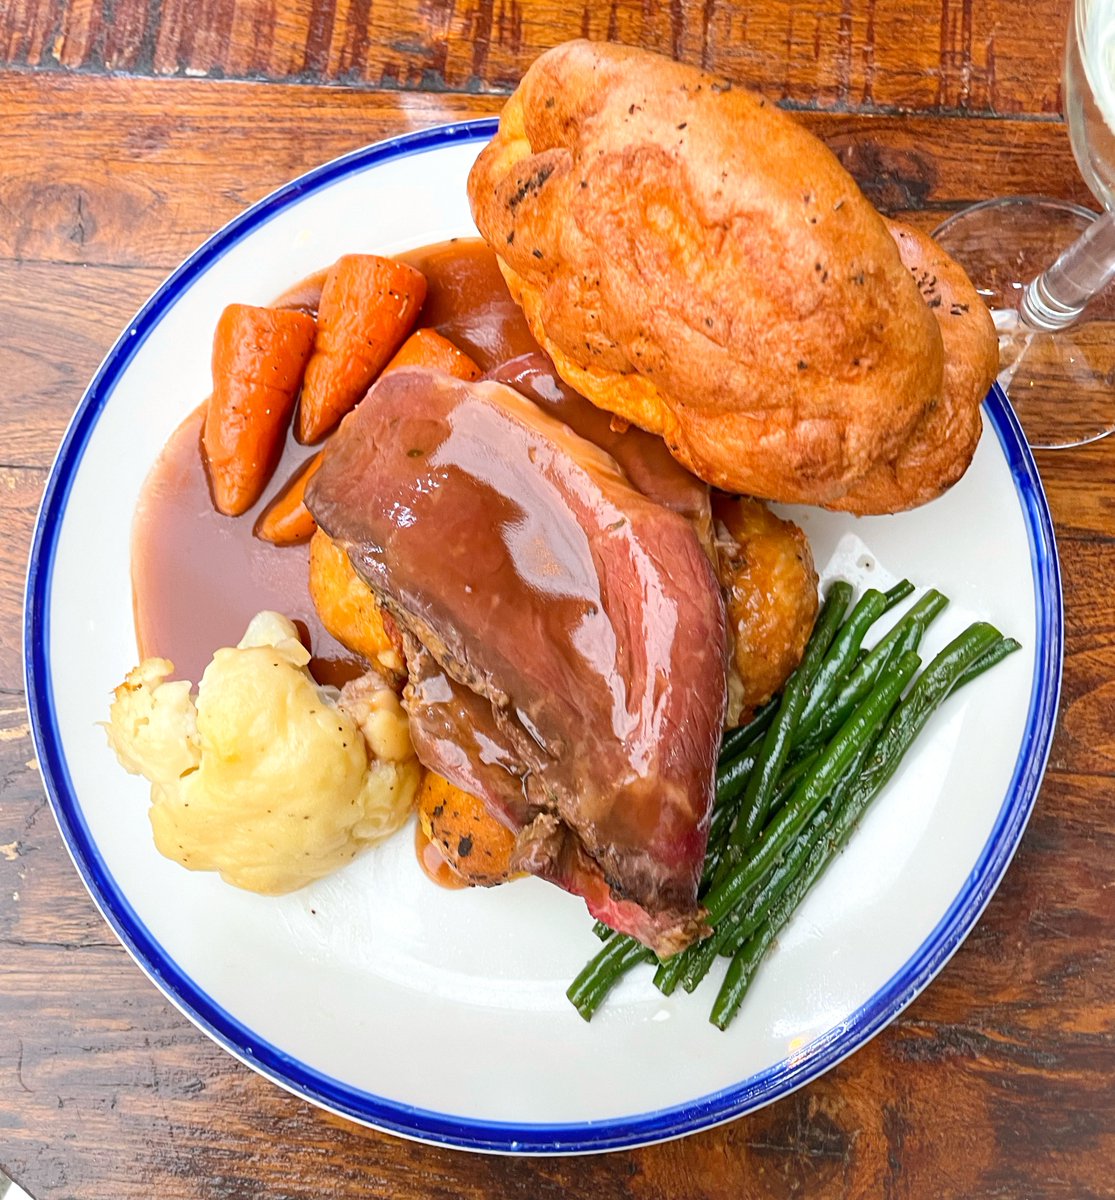 Weekends are made for Sunday roast at the @greenwich_tav . Don’t forget to send us a DM to book your spot with us tomorrow. 😉 #sundayfunday #sundayroast #sunday #sundayroastlondon #greenwich